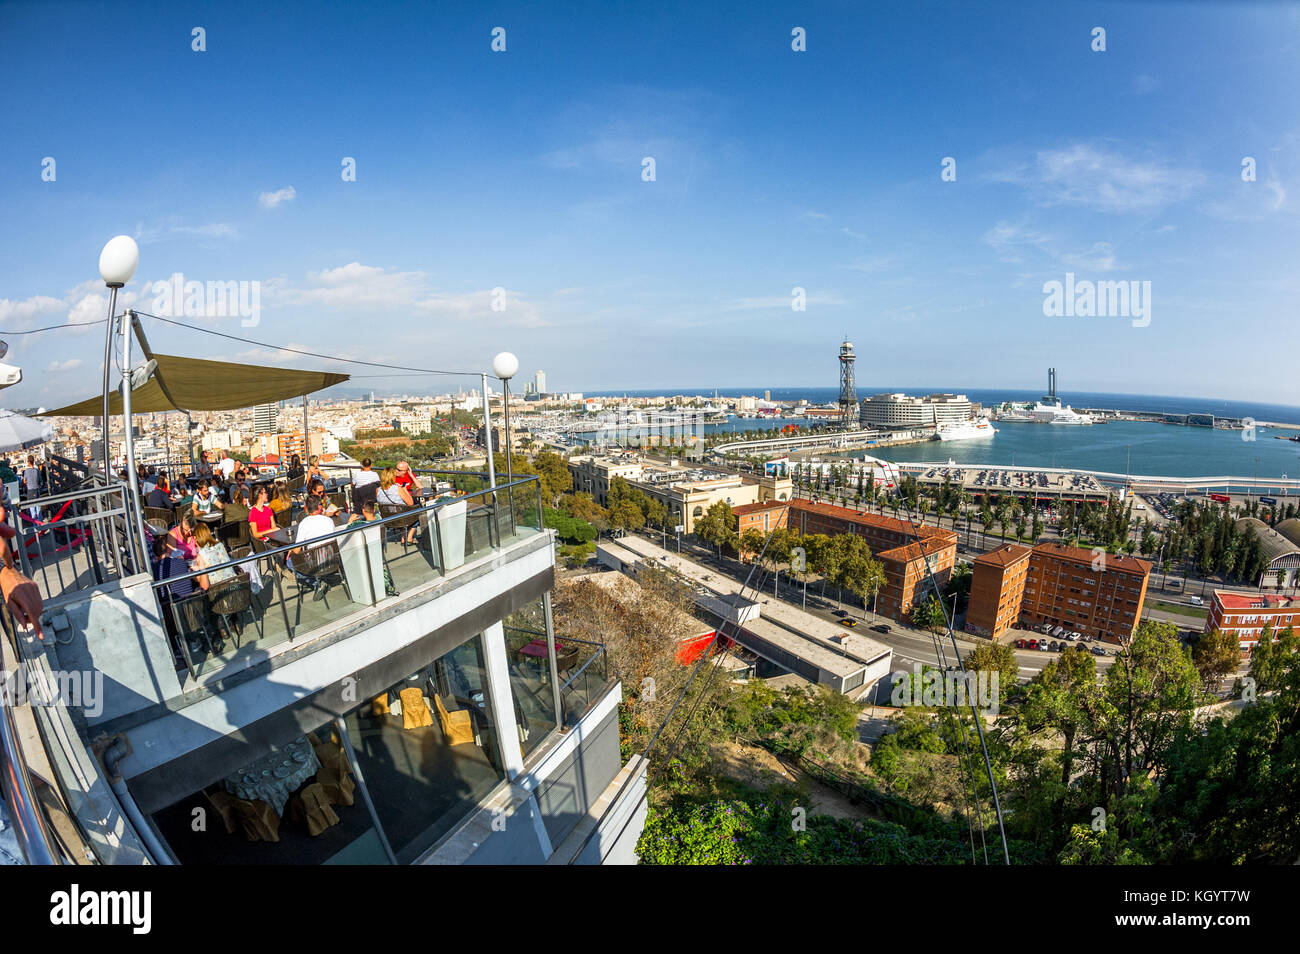 Customers in an open air cafe on Montjuric over looking Port Vell,Barcelona,Spain. Stock Photo